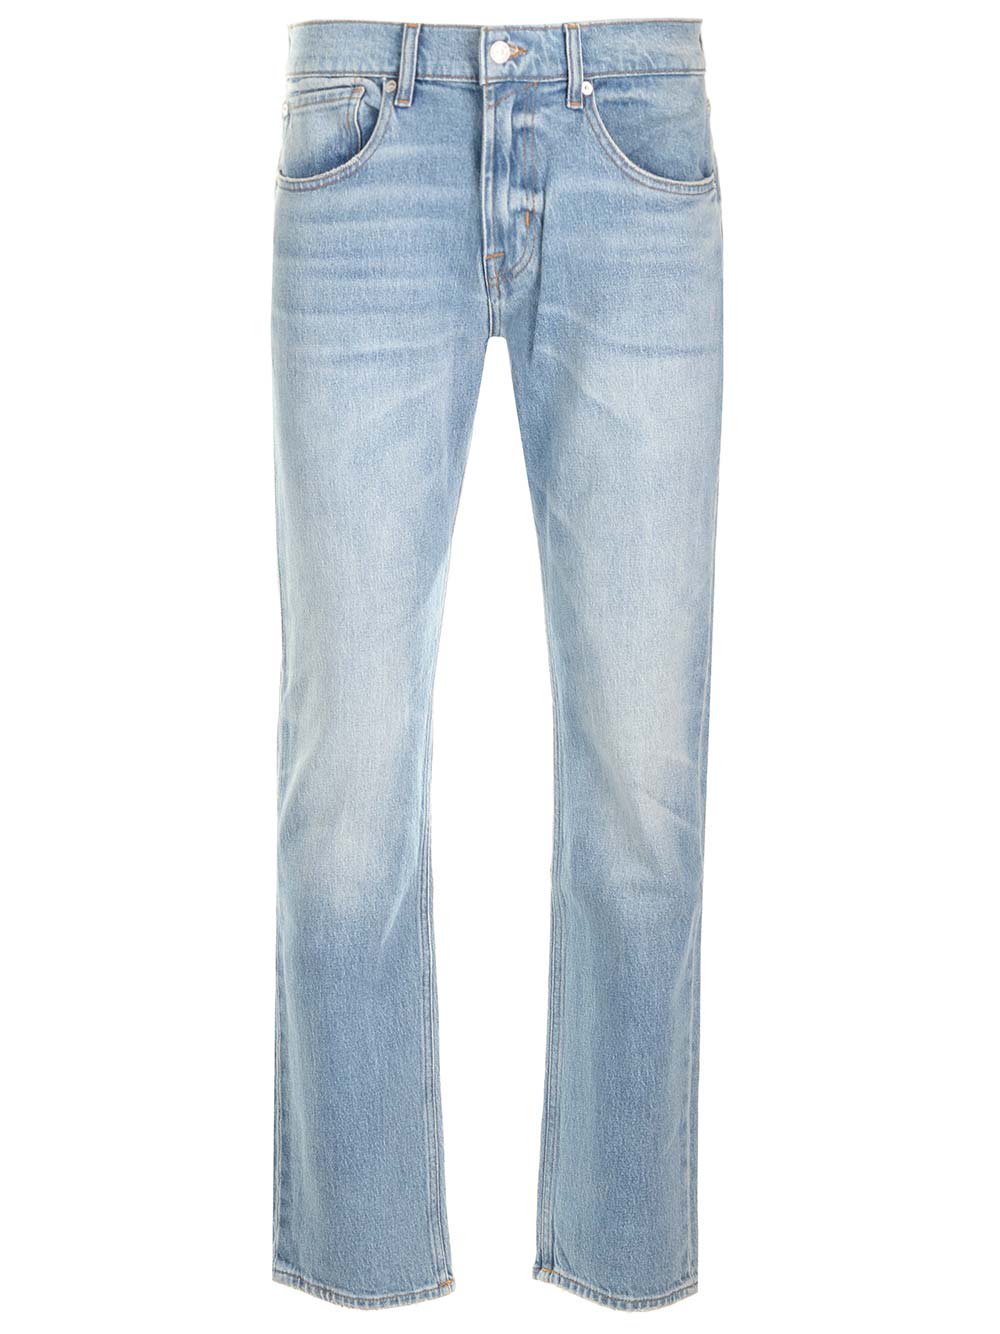 7 for all mankind straight leg jeans